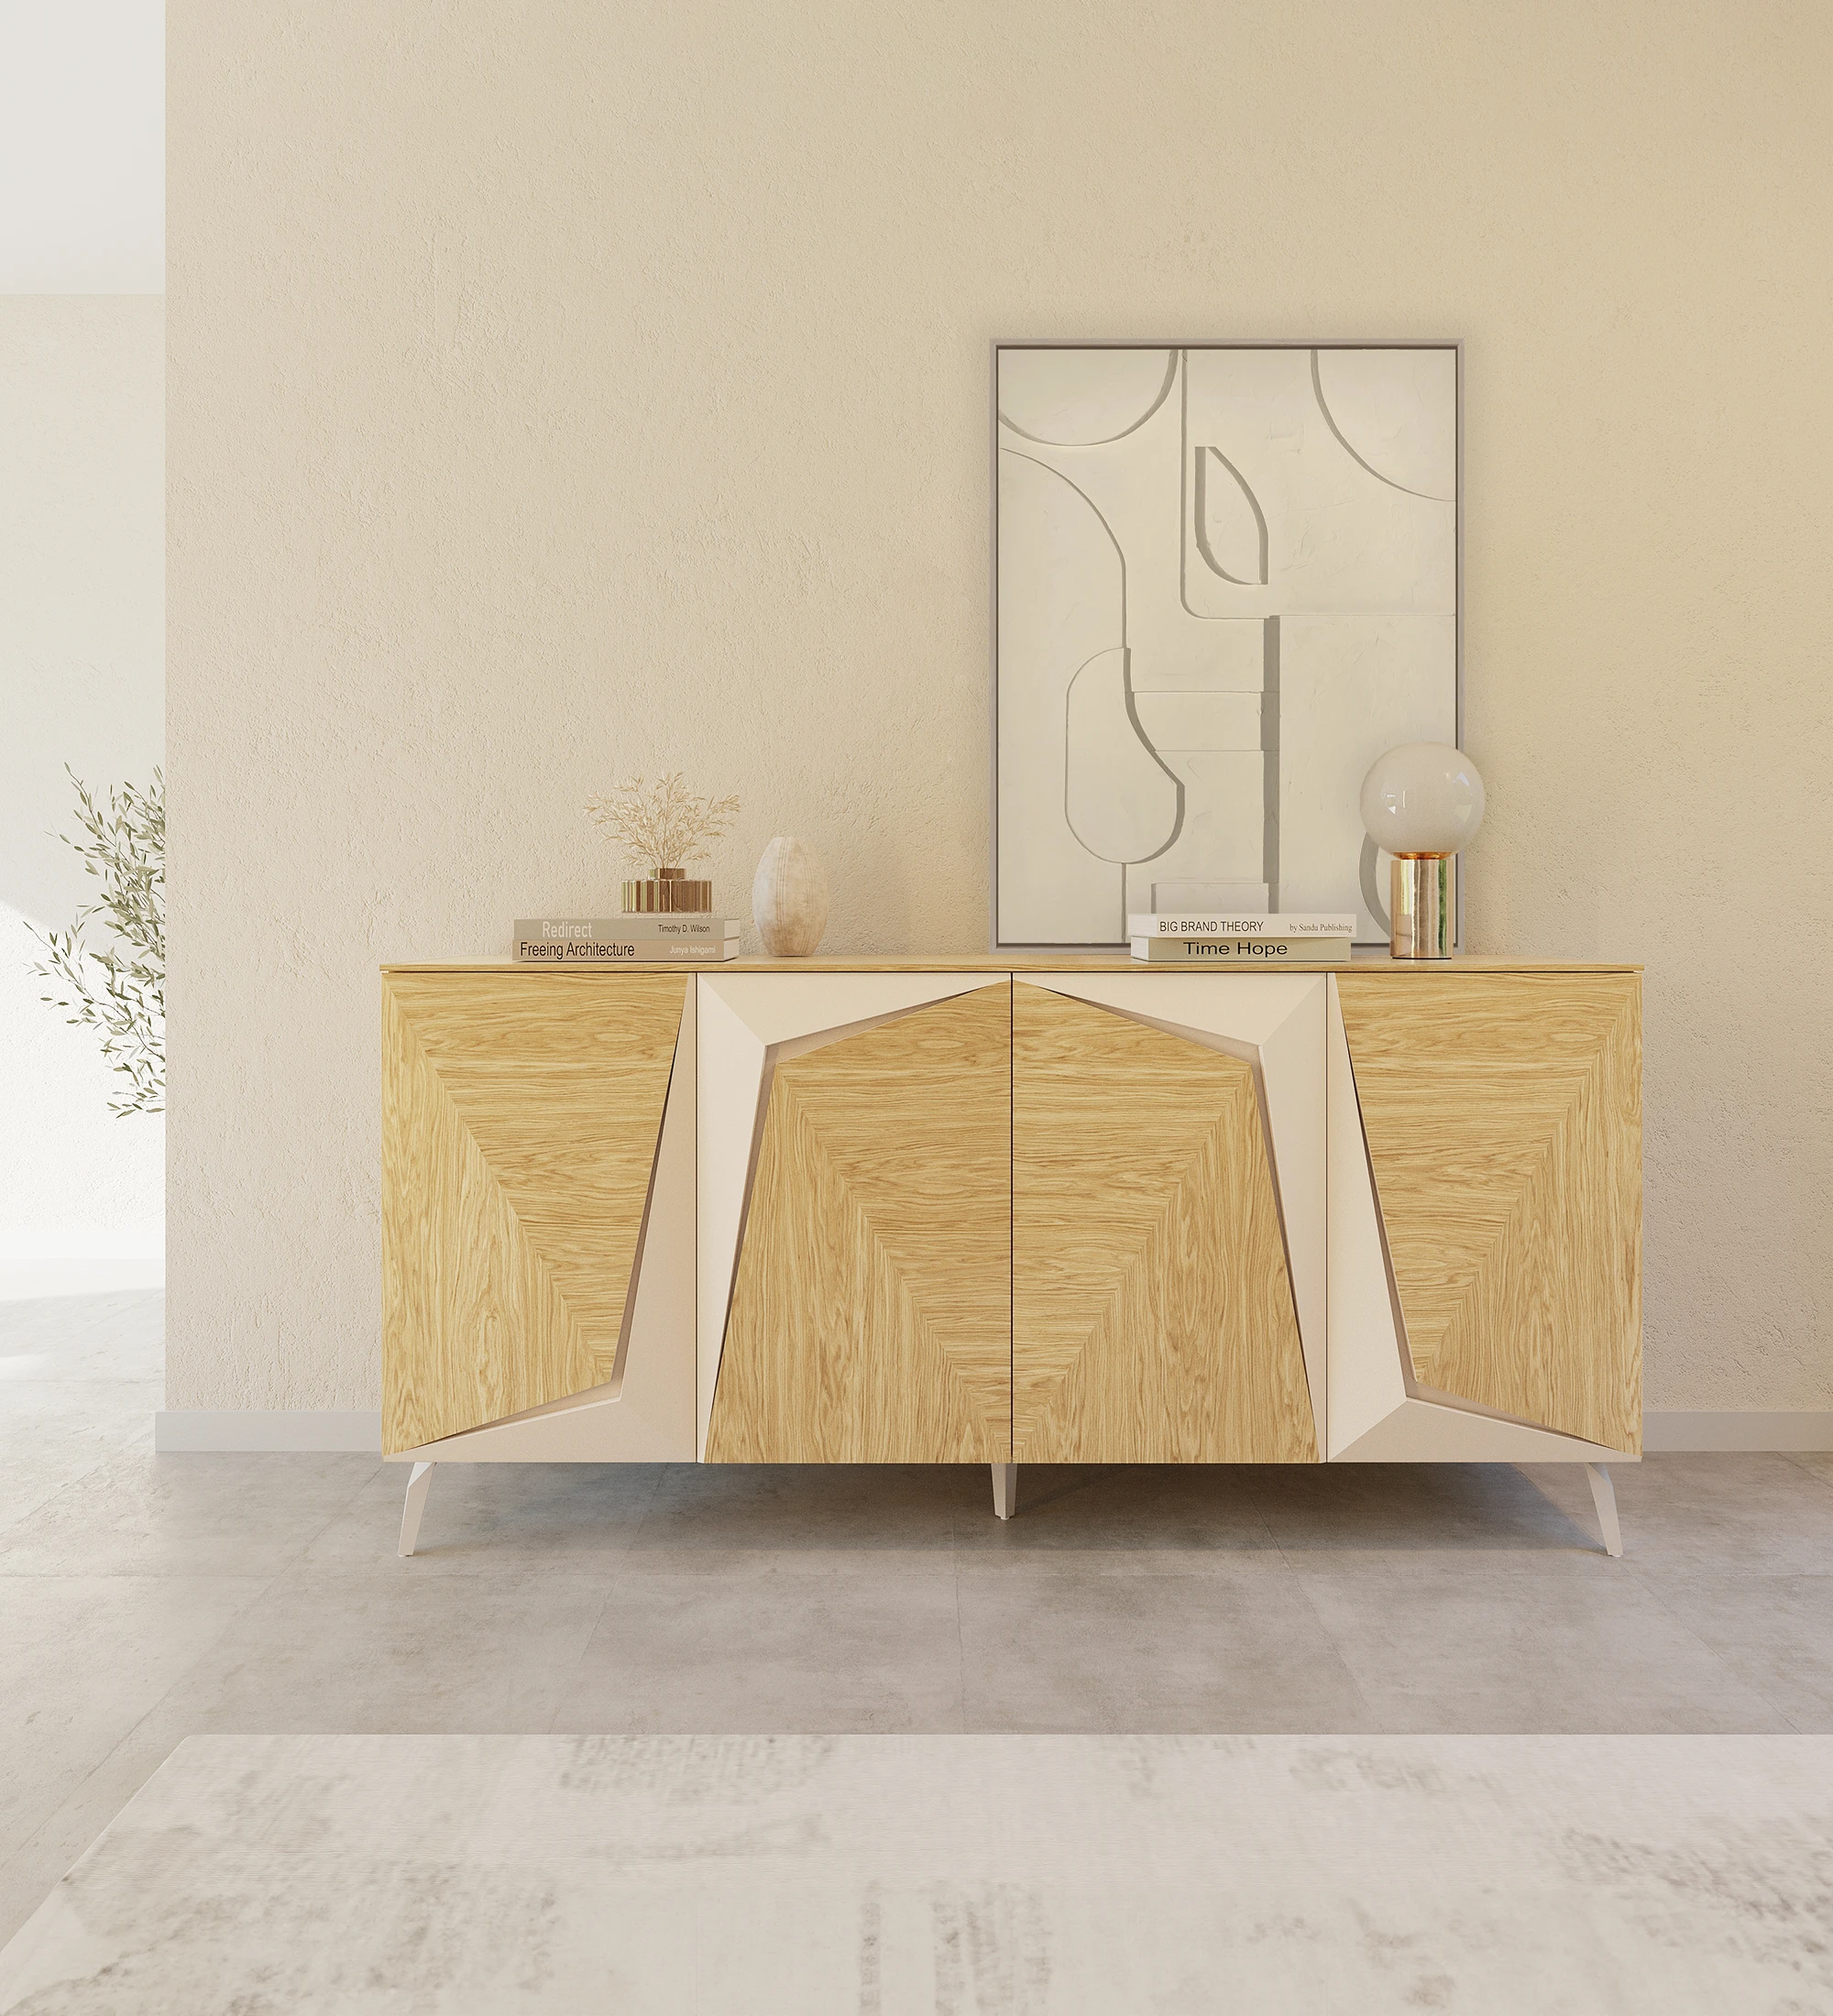 Sideboard with 4 doors in natural oak with pearl details, with natural oak structure and pearl lacquered metal base.